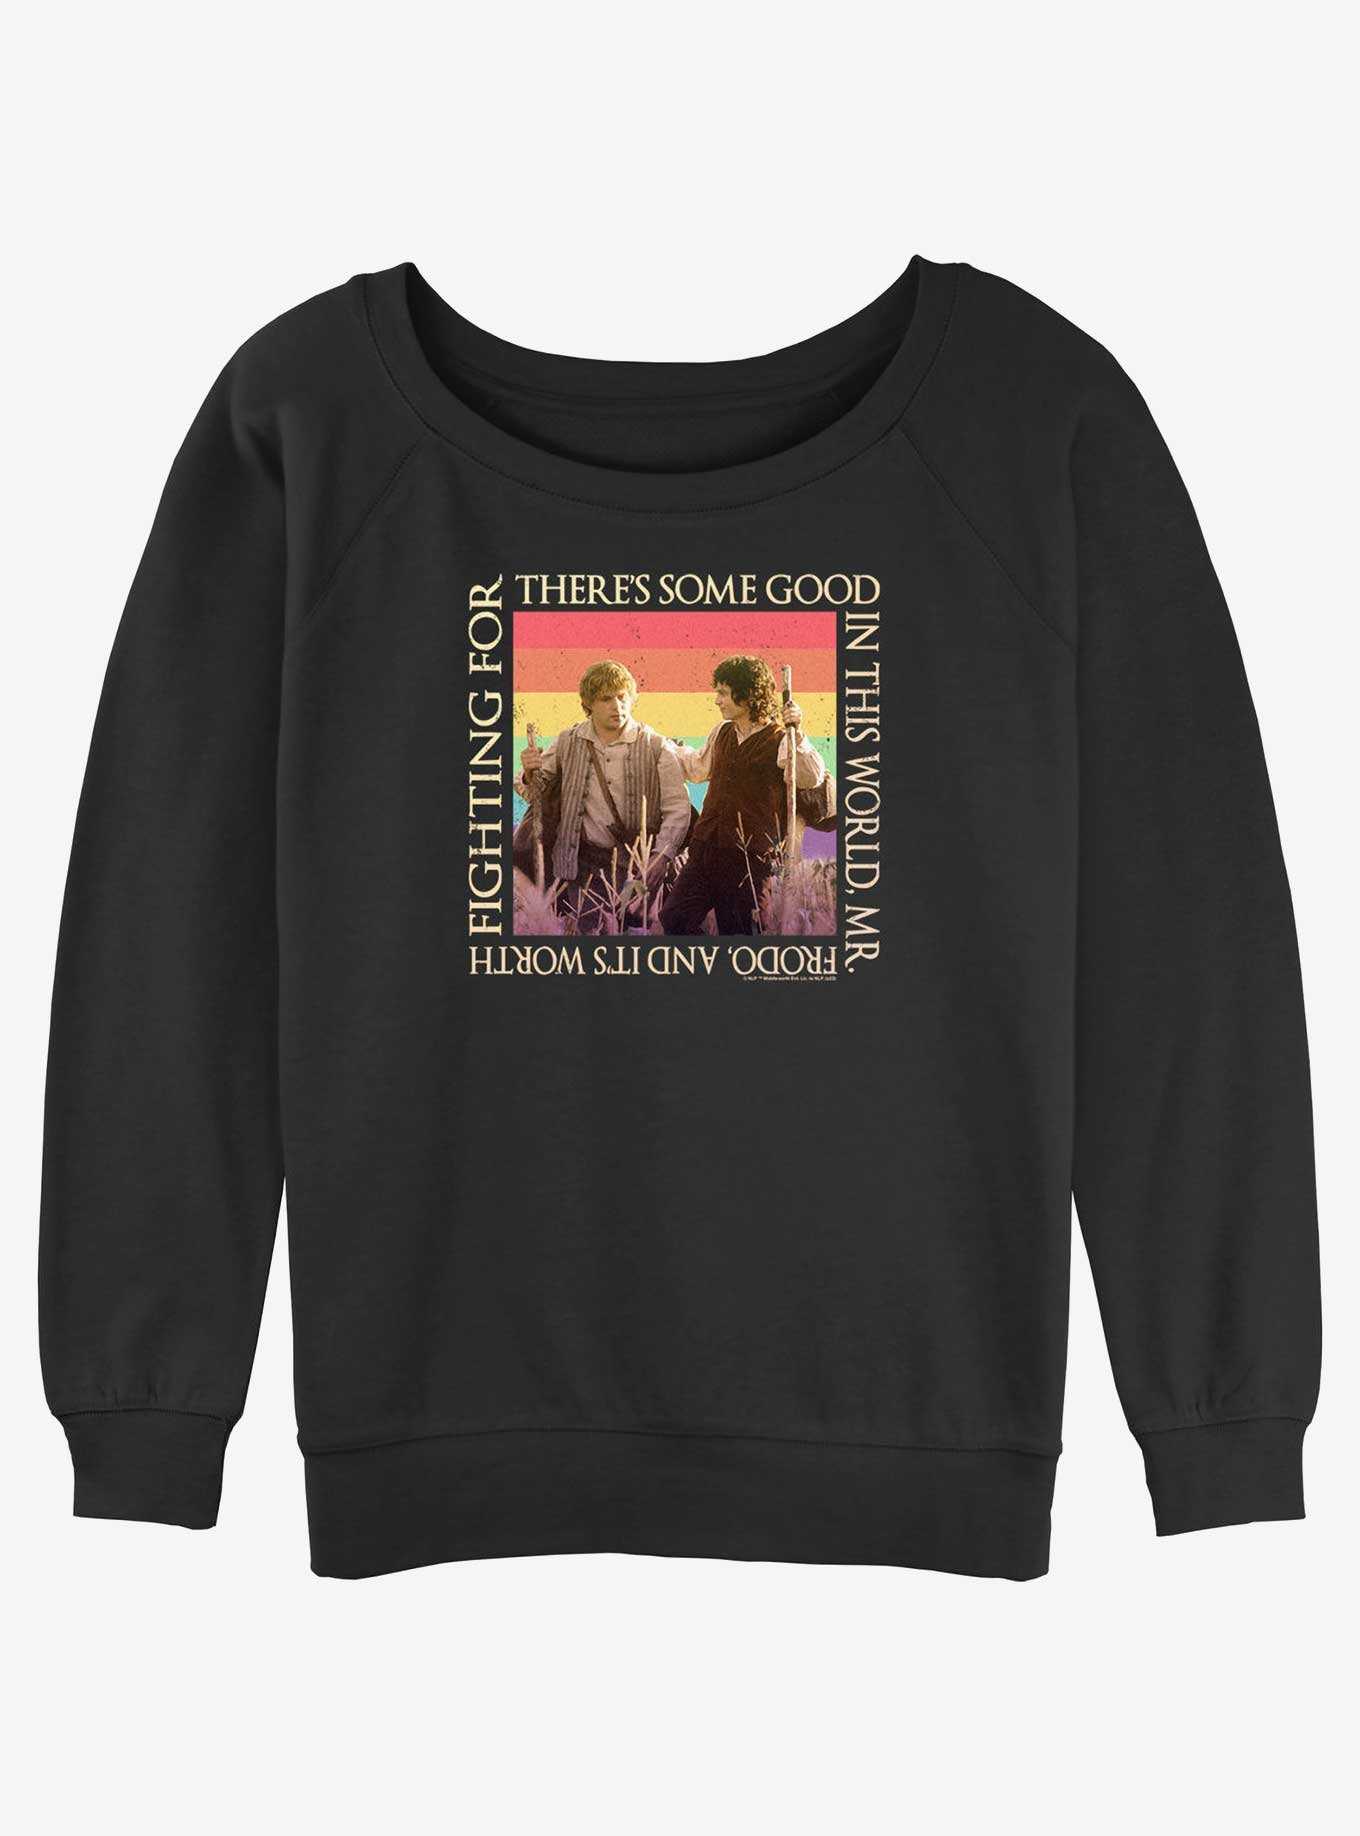 The Lord of the Rings Some Good In This World Womens Slouchy Sweatshirt, , hi-res